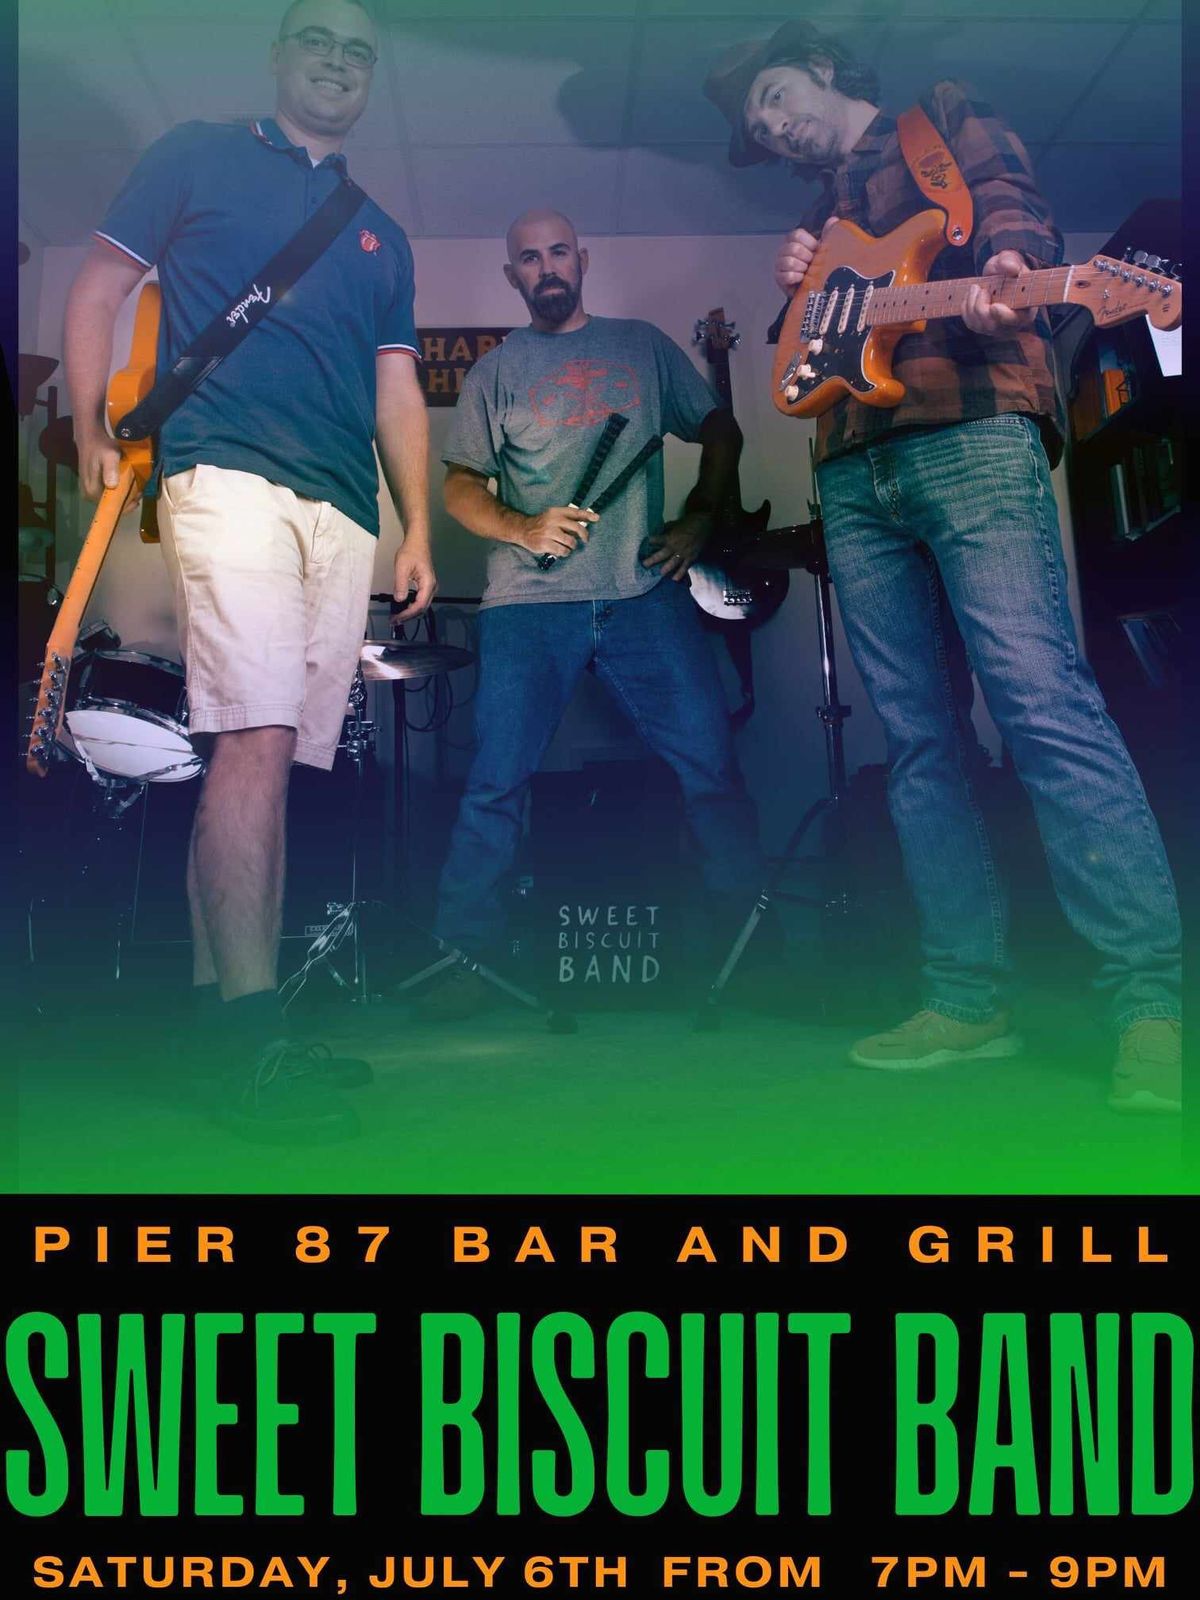 Sweet Biscuit Band at Pier 87